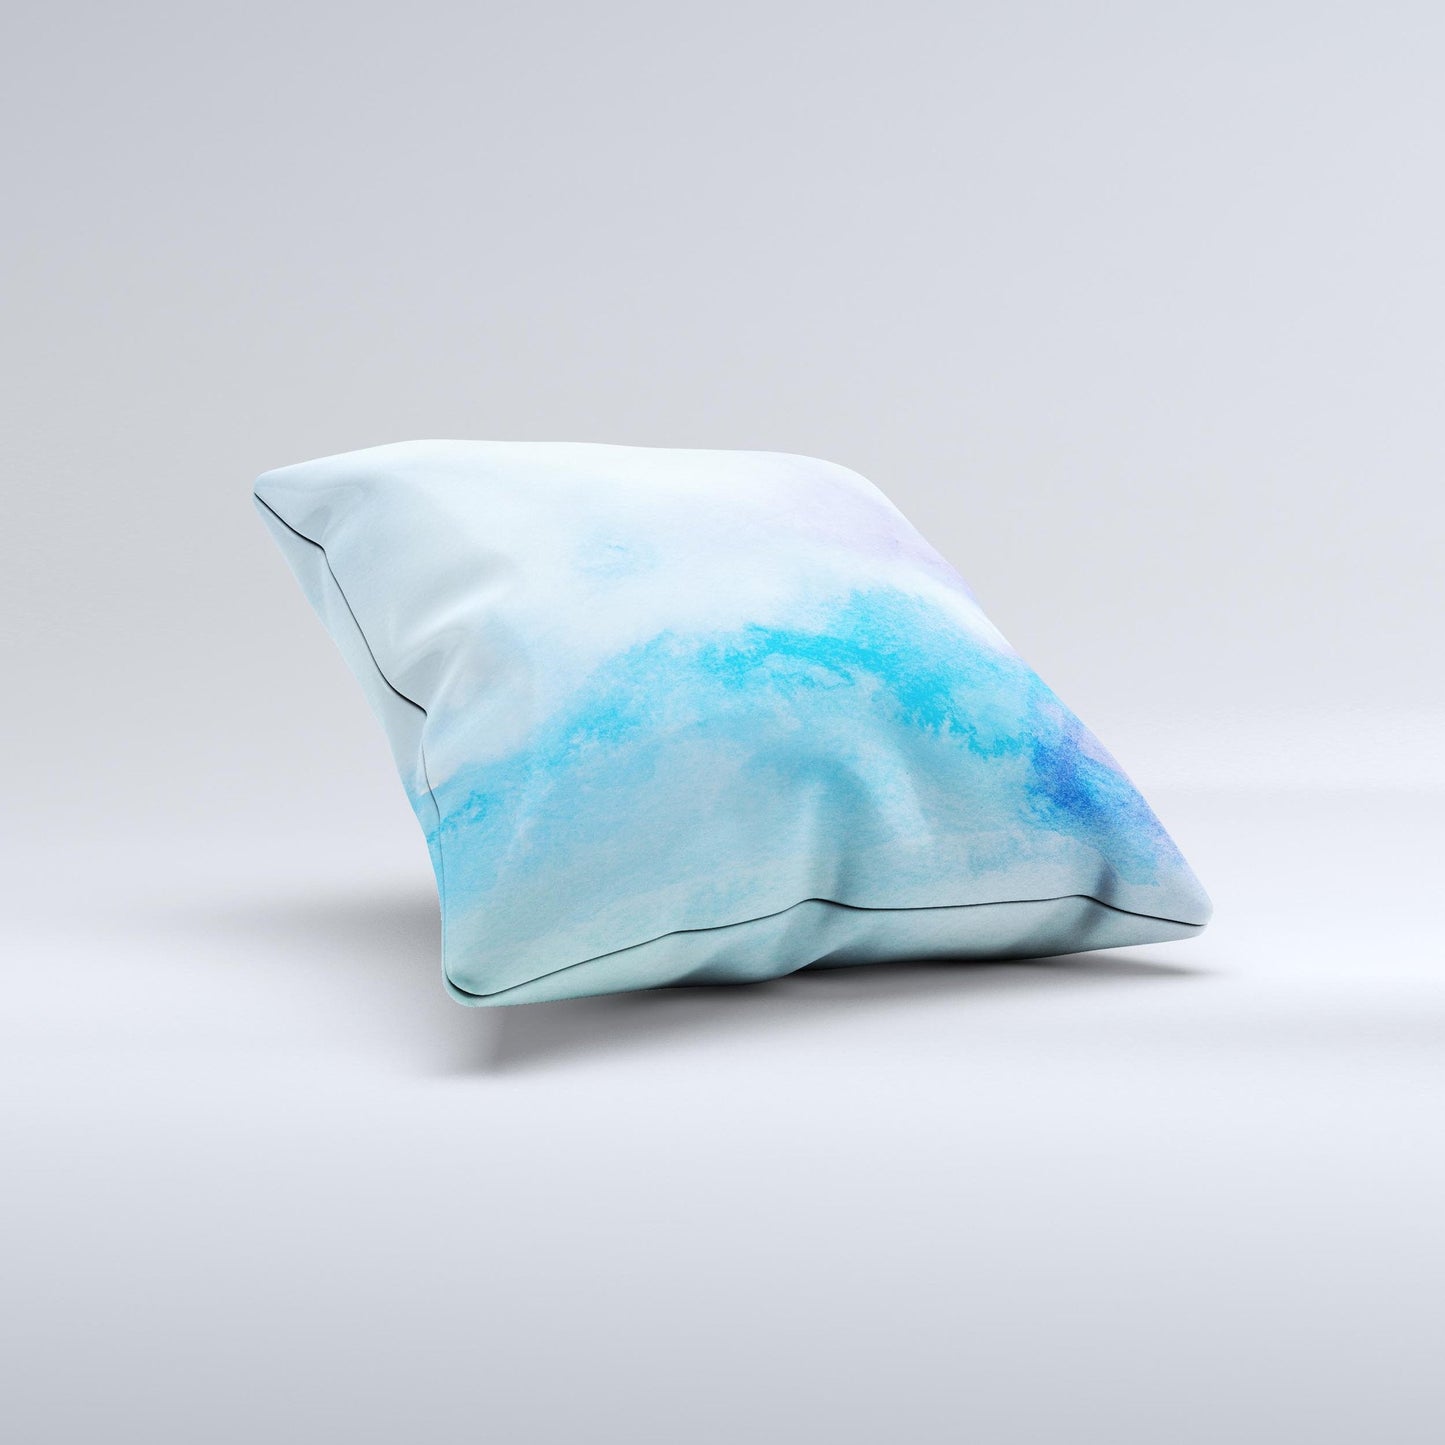 Subtle Green & Blue Watercolor V2 Ink-Fuzed Decorative Throw Pillow